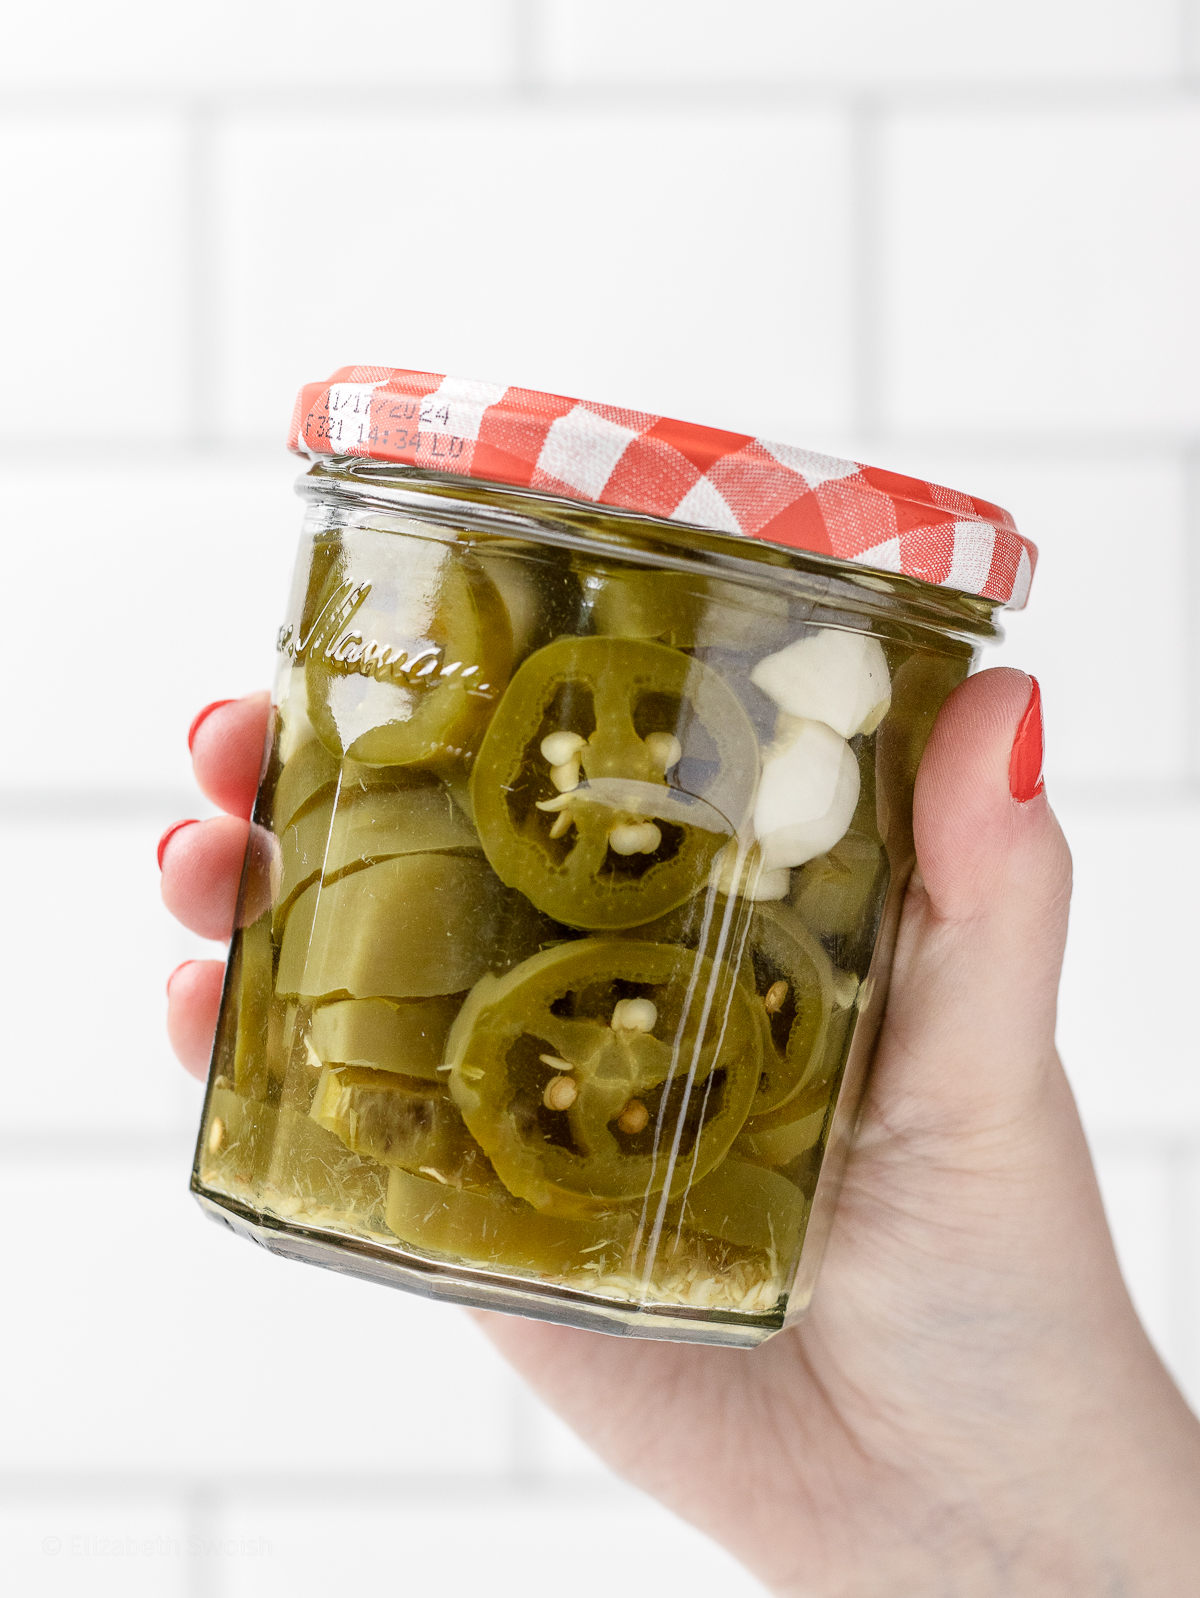 Hand holding onto a full jar of homemade Quick Pickled Jalapenos.